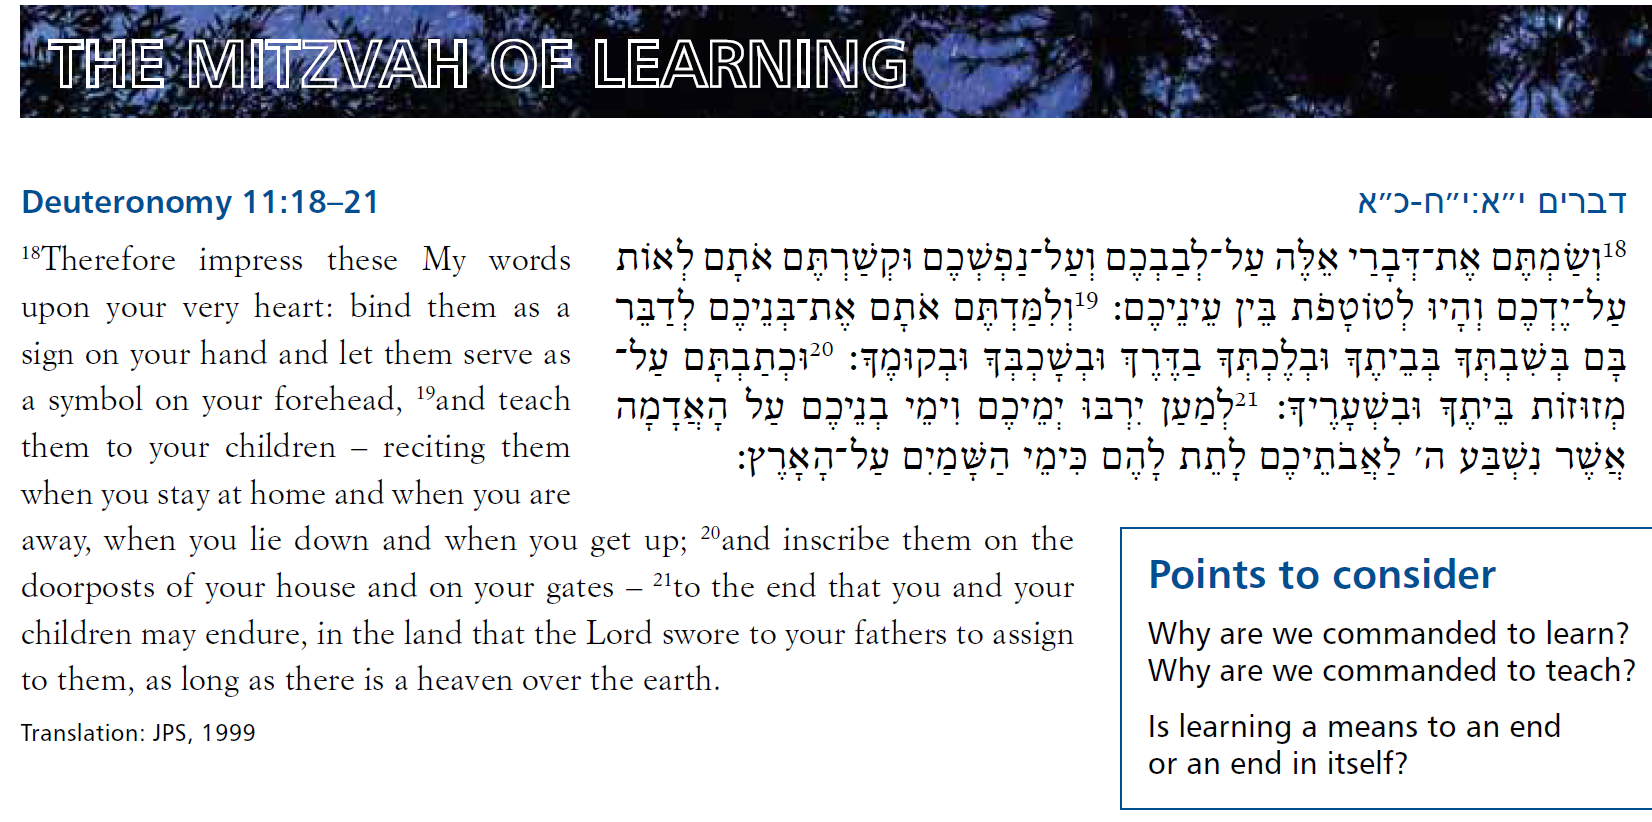 THE MITZVA OF LEARNING